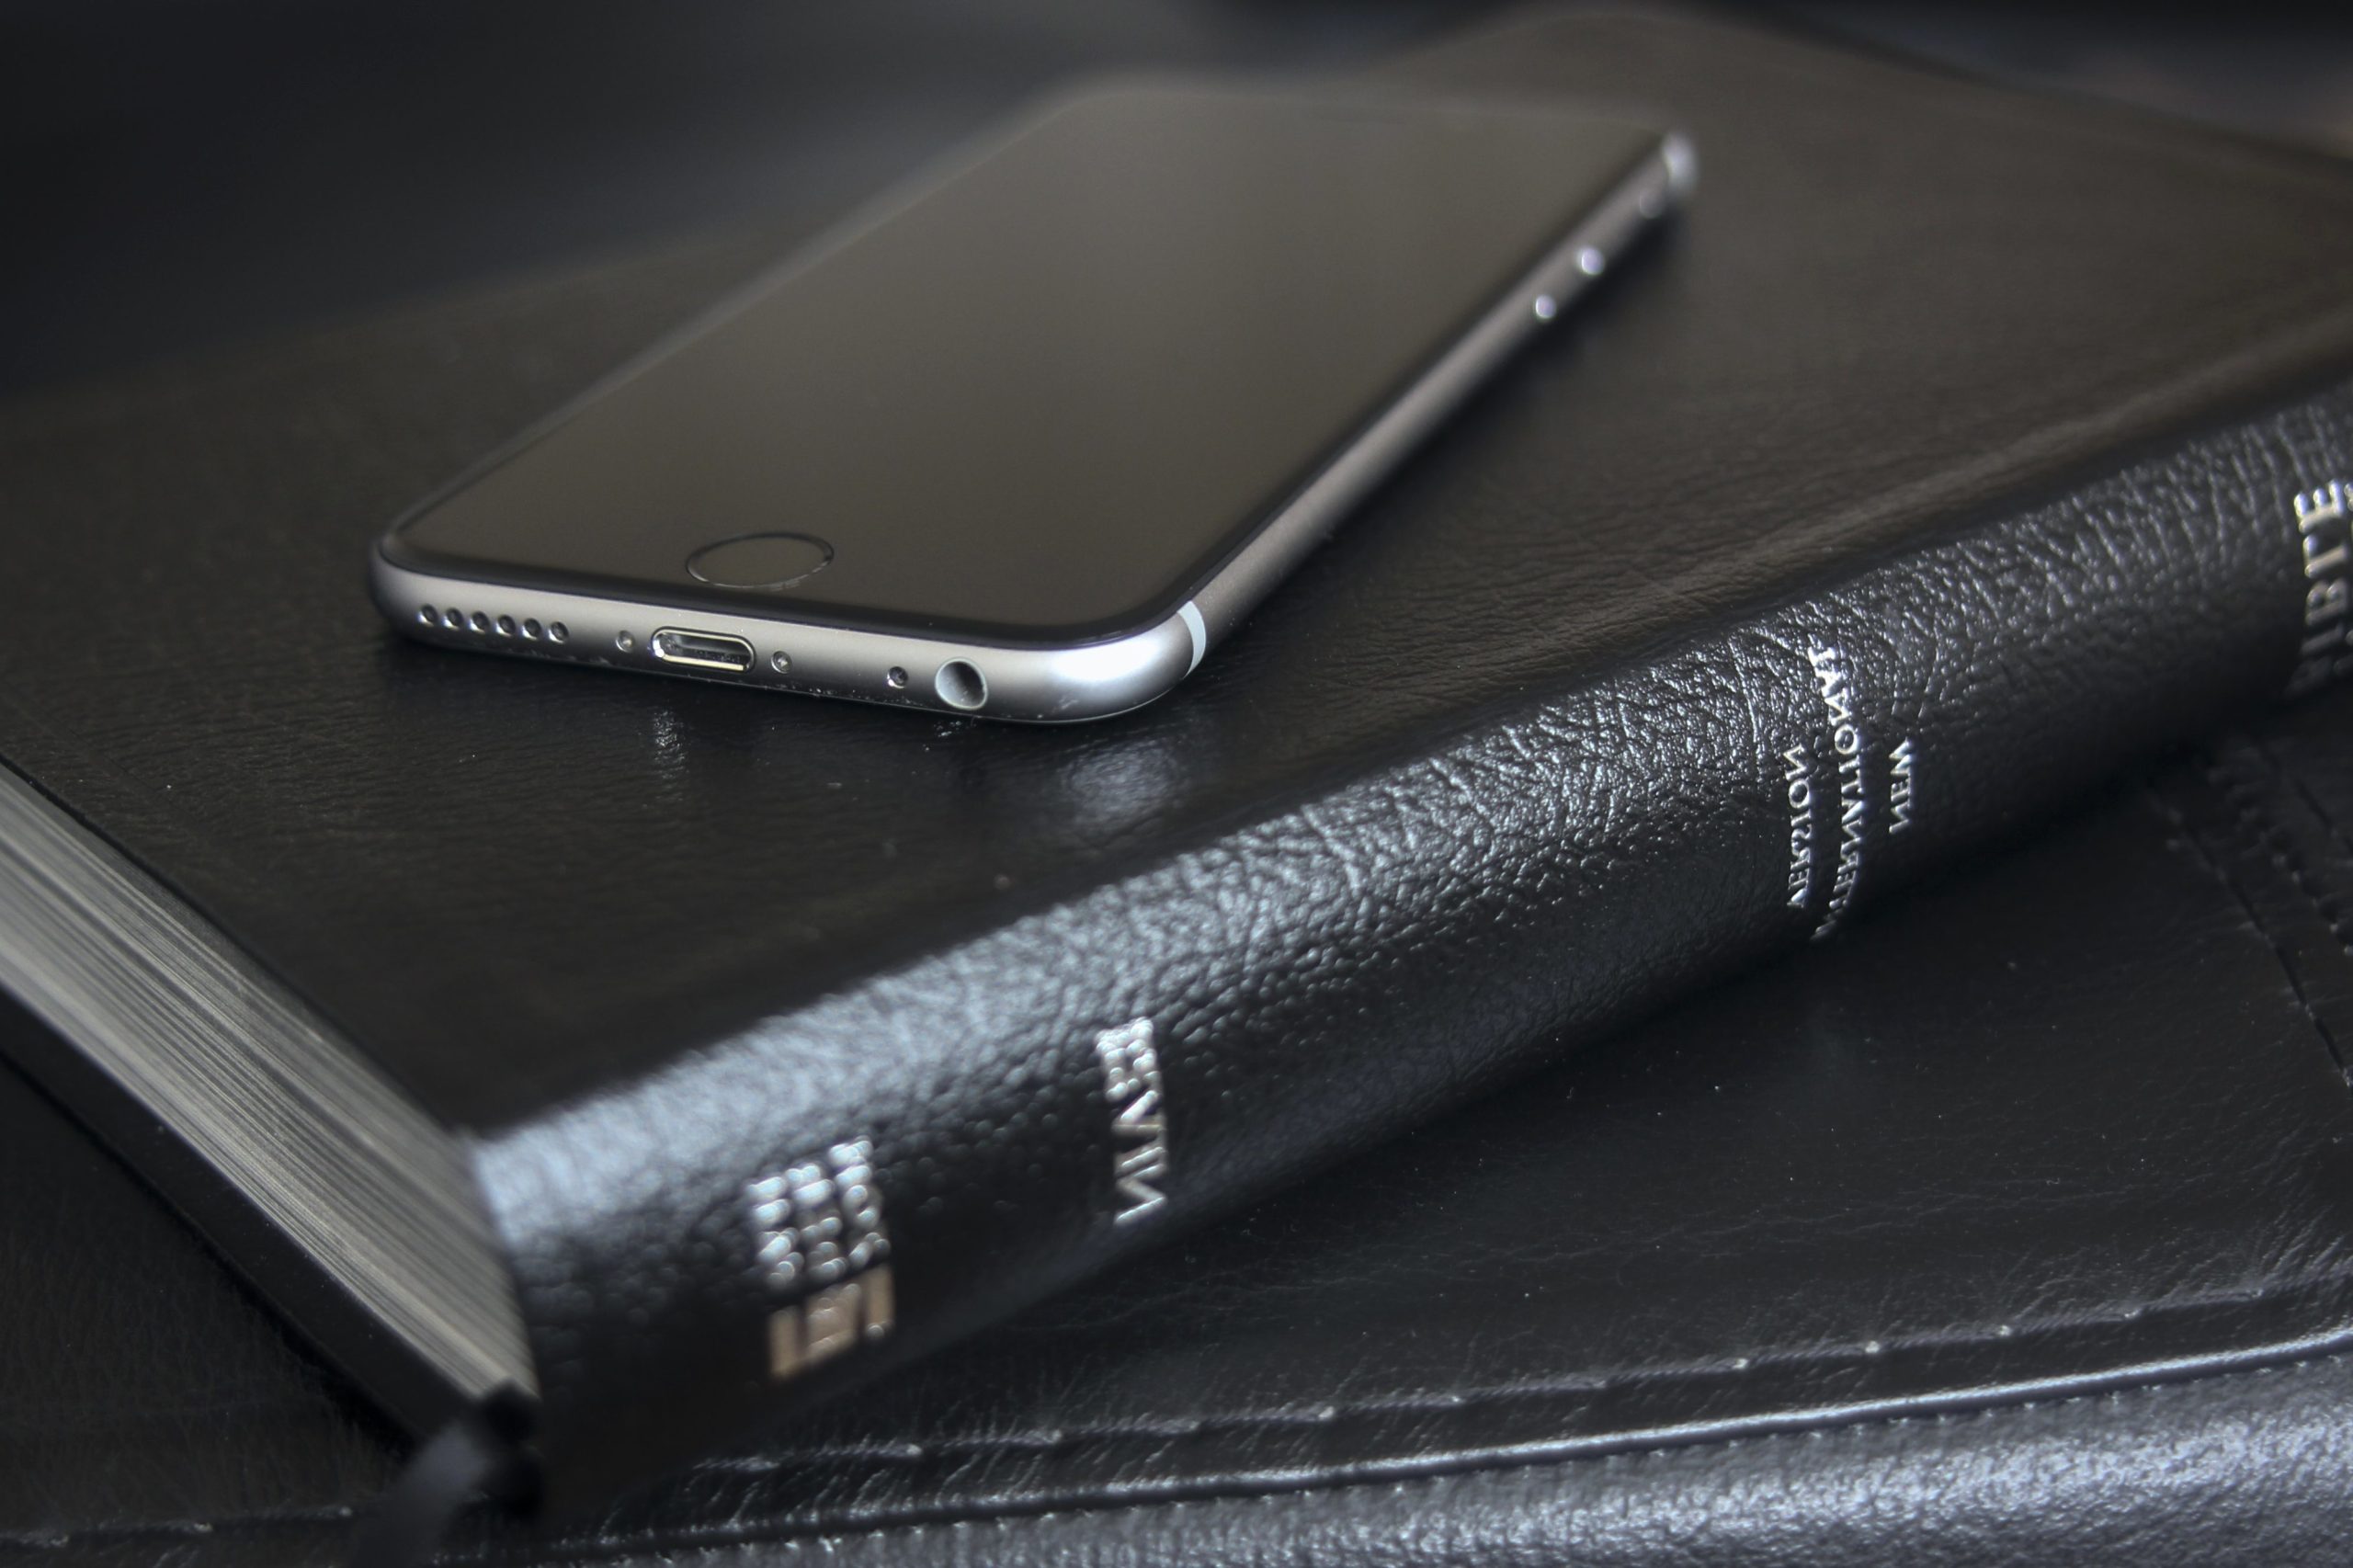 Christian Gadgets: Accessories That Can Keep You Anchored (Part 2)